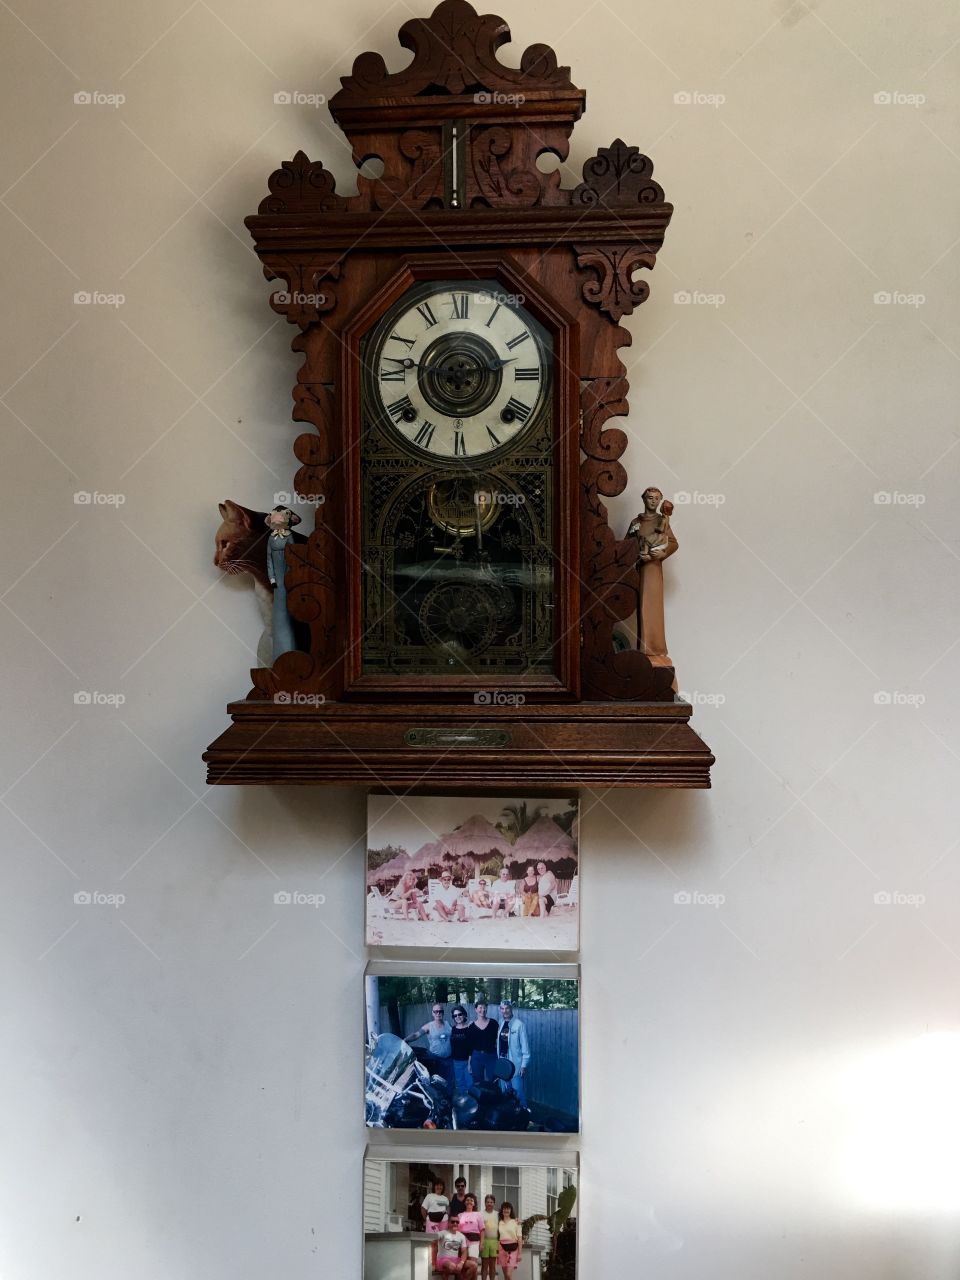 Gingerbread Clock hanging on wall, with fun photos over the years!